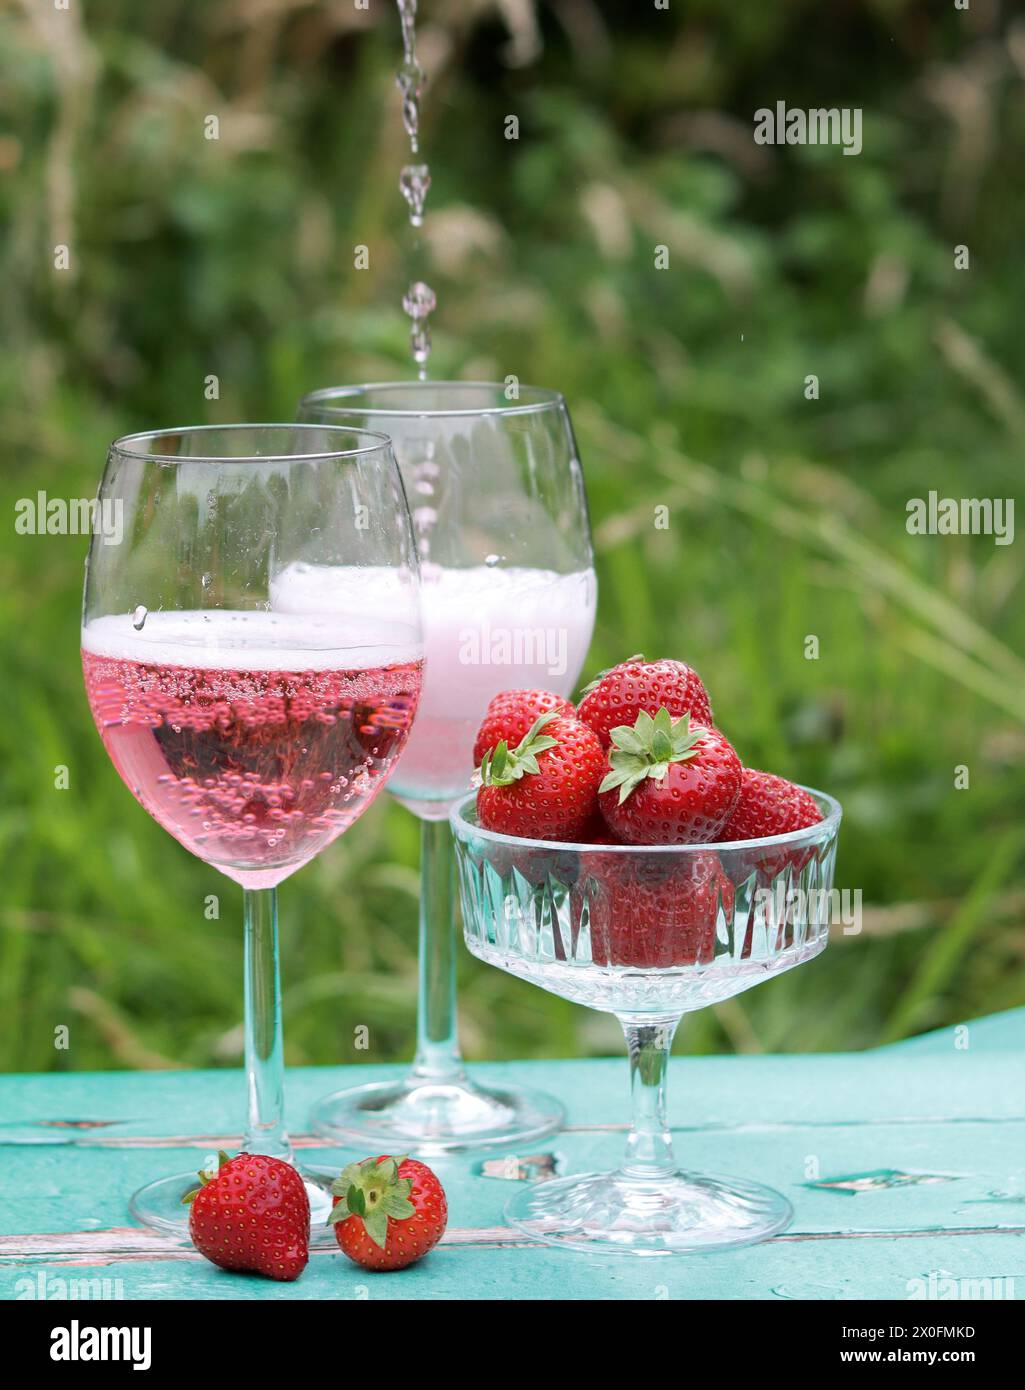 Two glasses of rose sparkling wine and strawberry on a  table. Romantic picnic outdoors. Close up photo of glass tableware. Summer drinks and food. Stock Photo